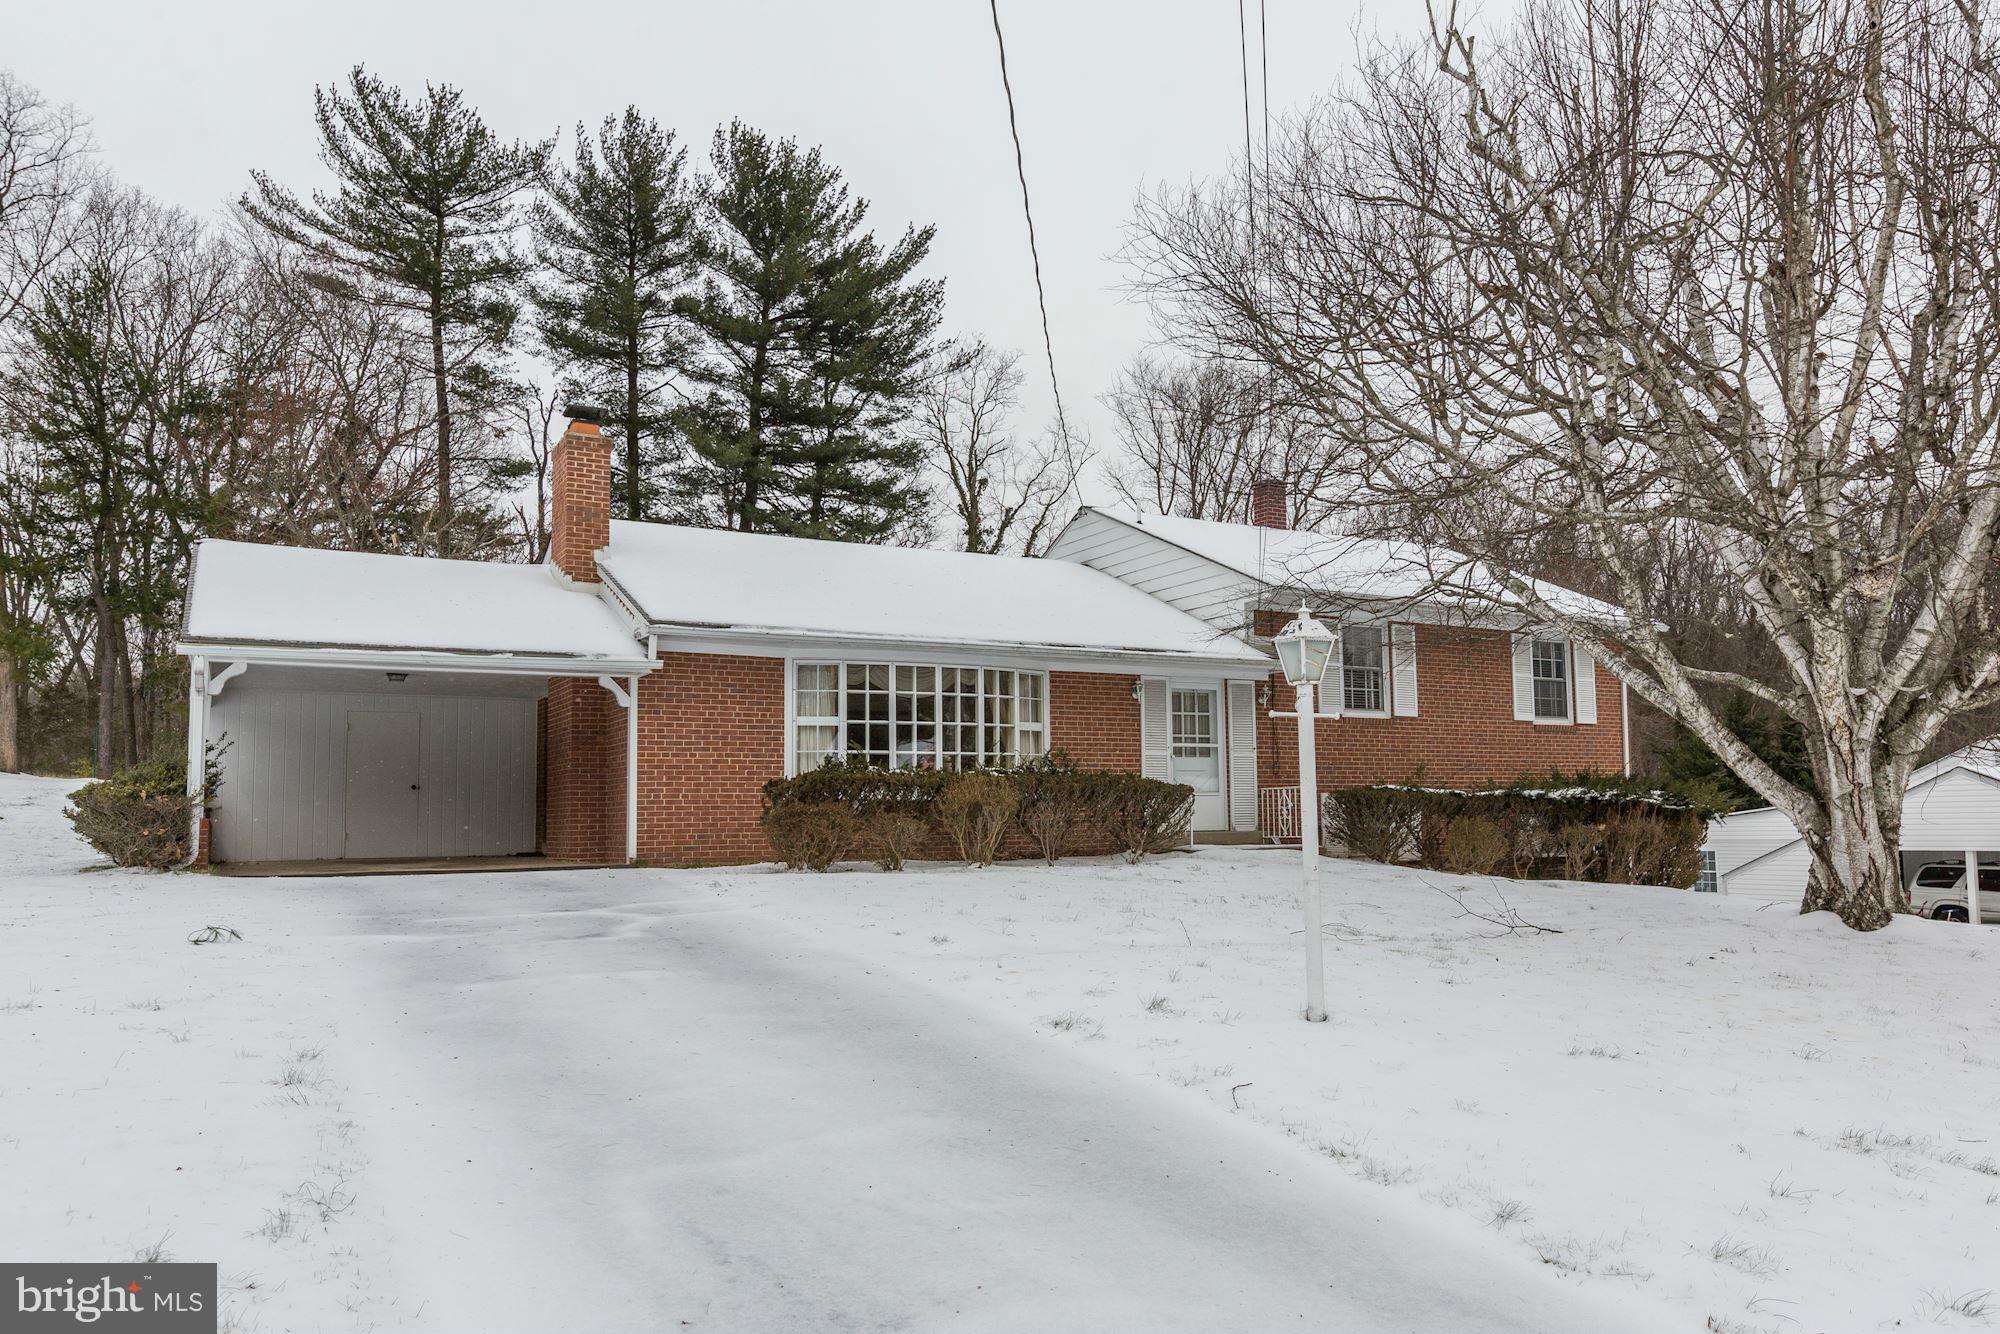 a view of a house with a snow in front of house